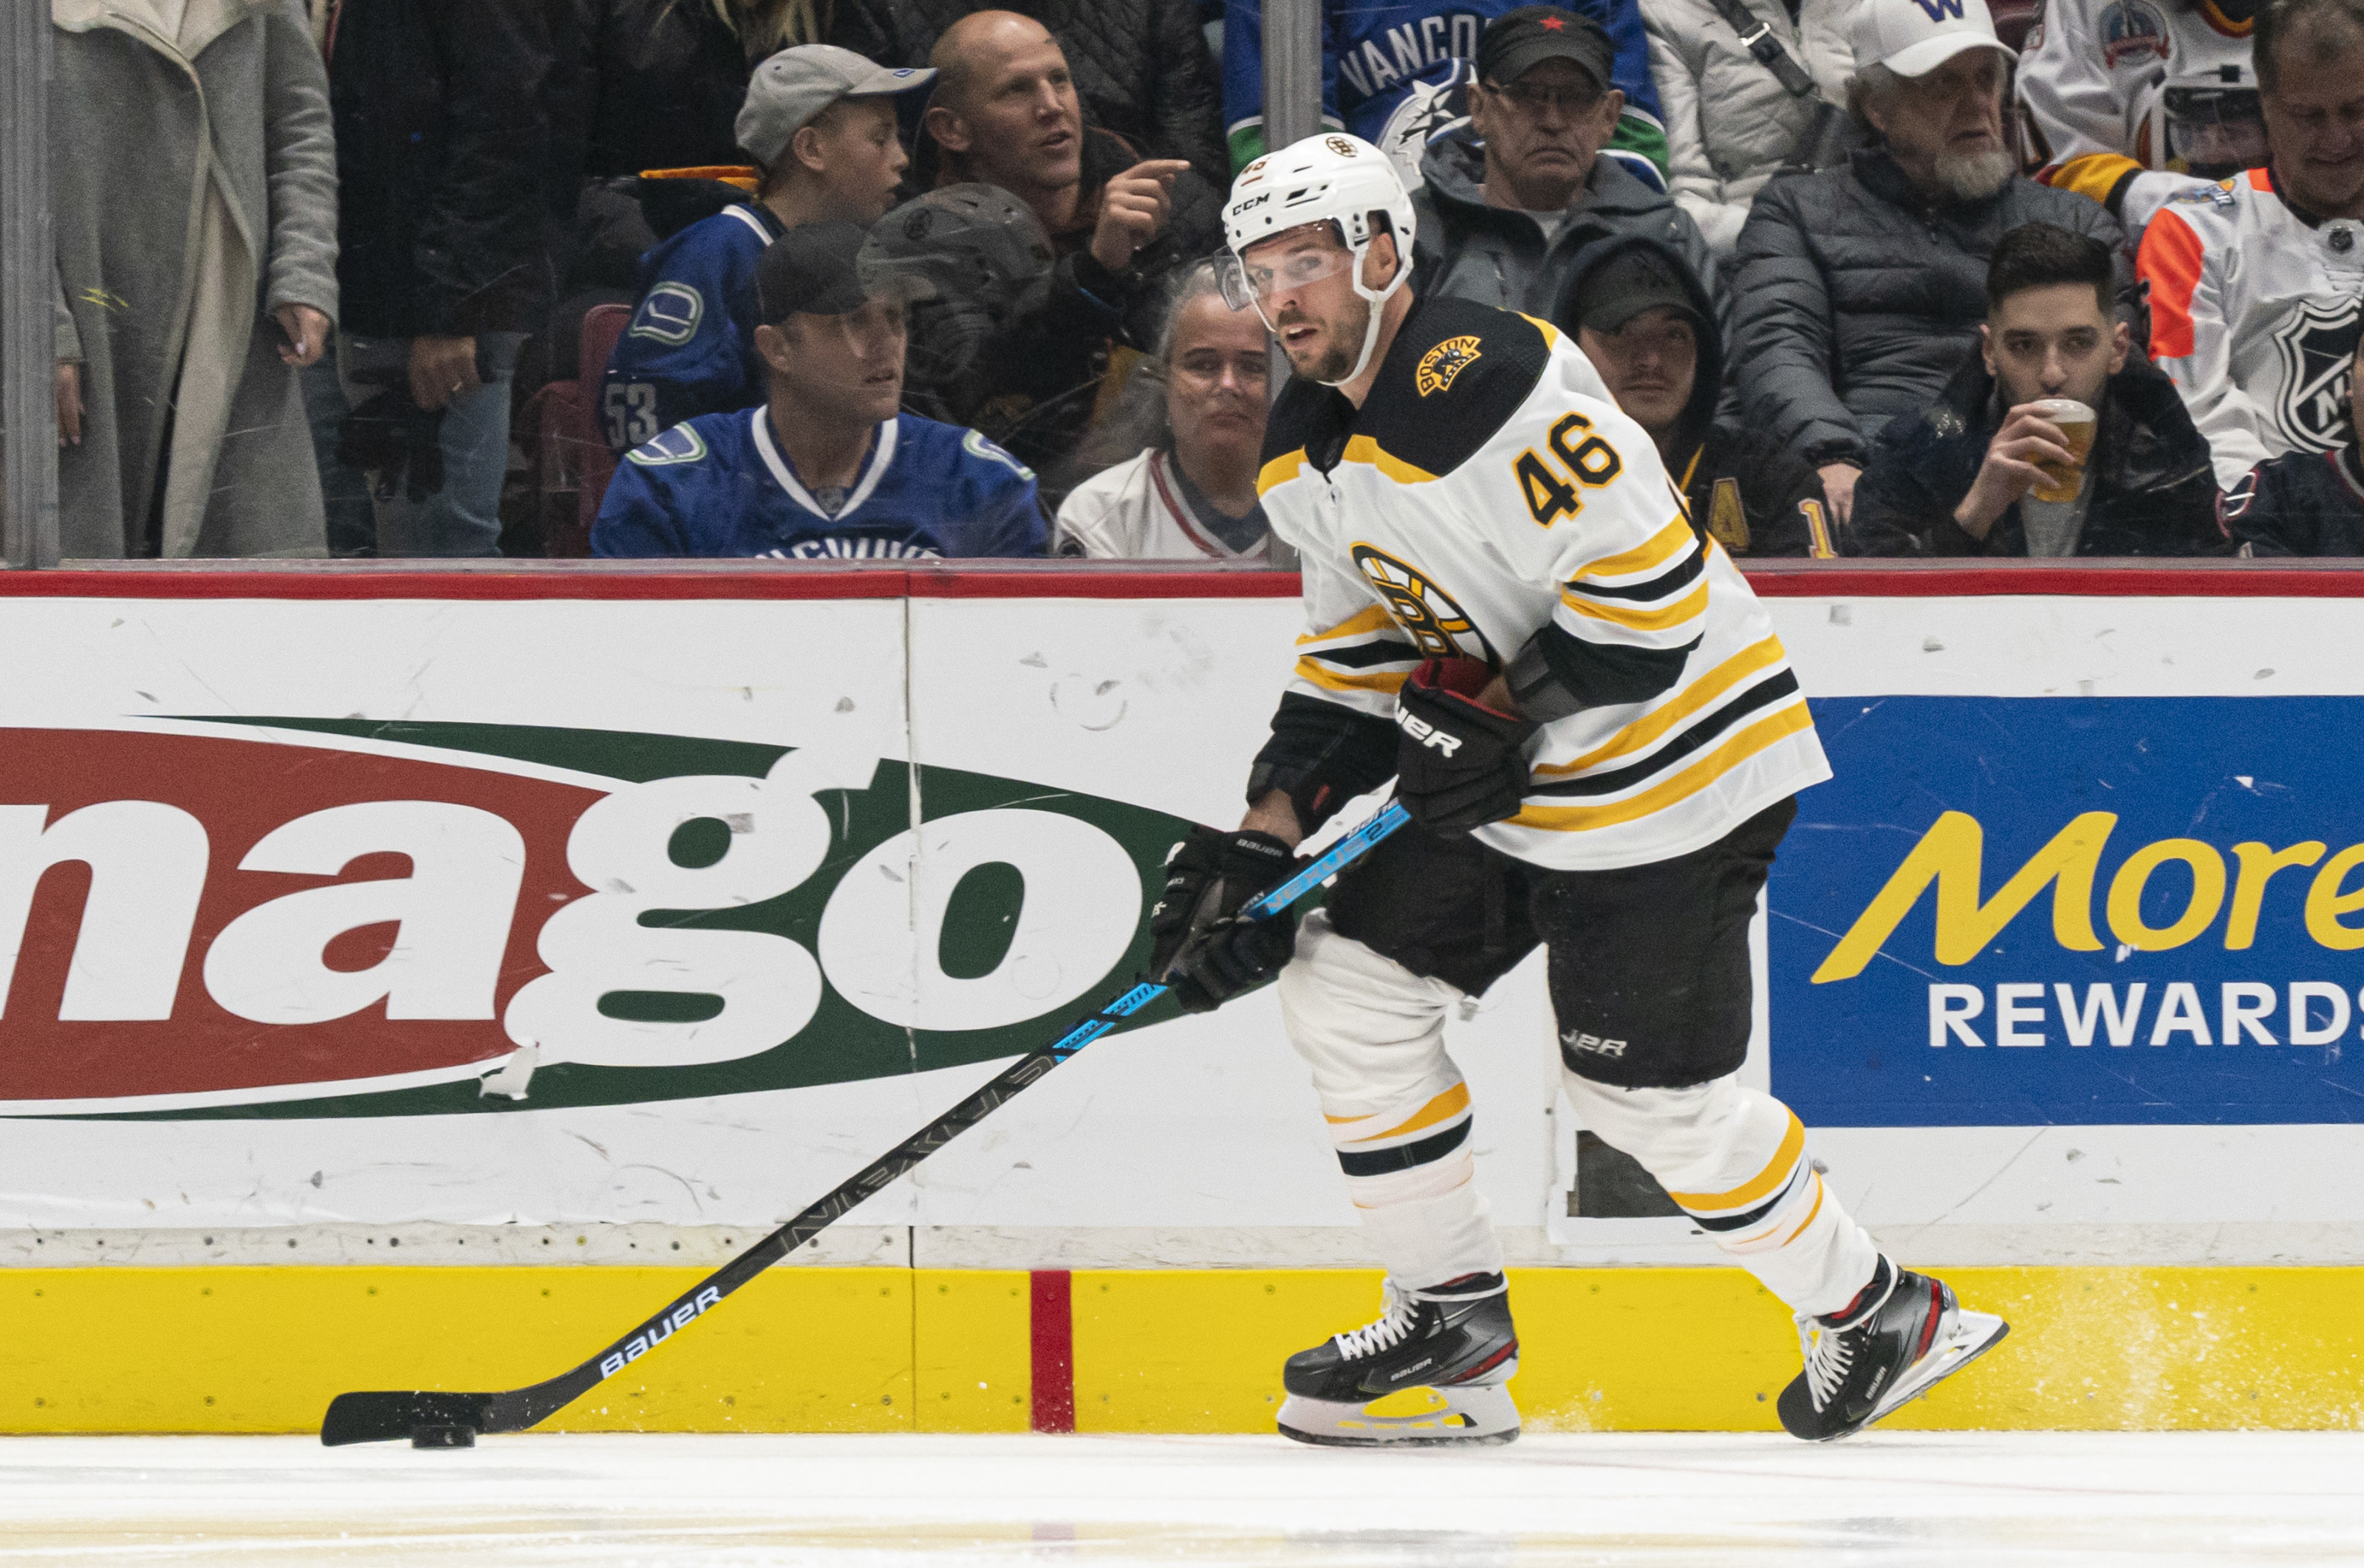 Here's what David Krejci had to say about returning to the Bruins